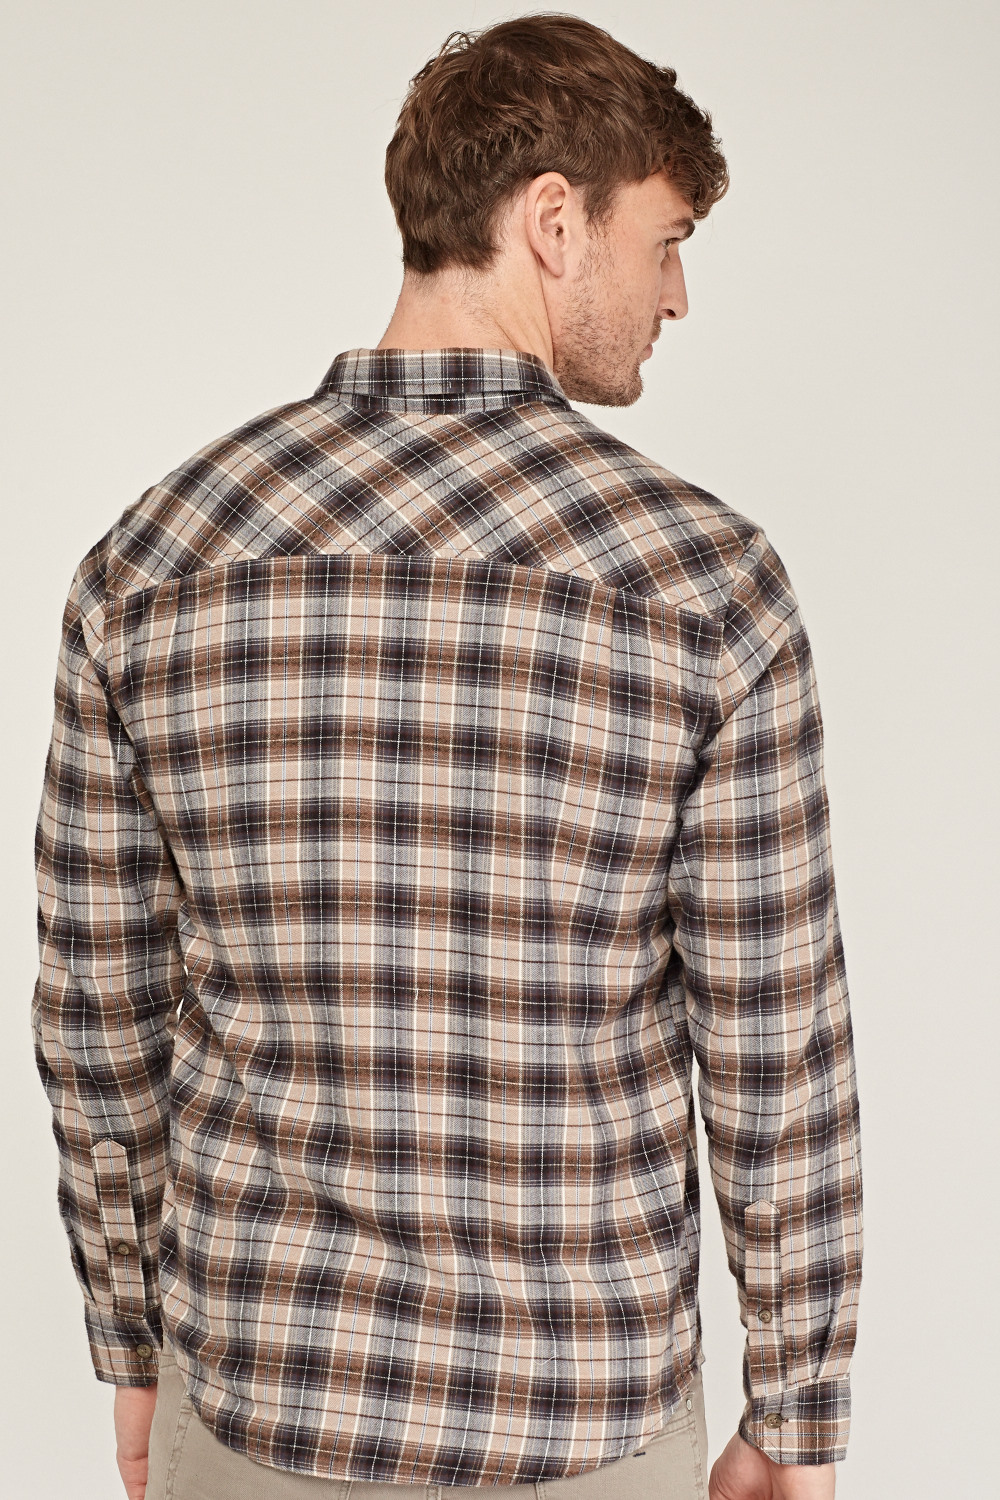 Gingham Checked Mens Shirt - Just $7